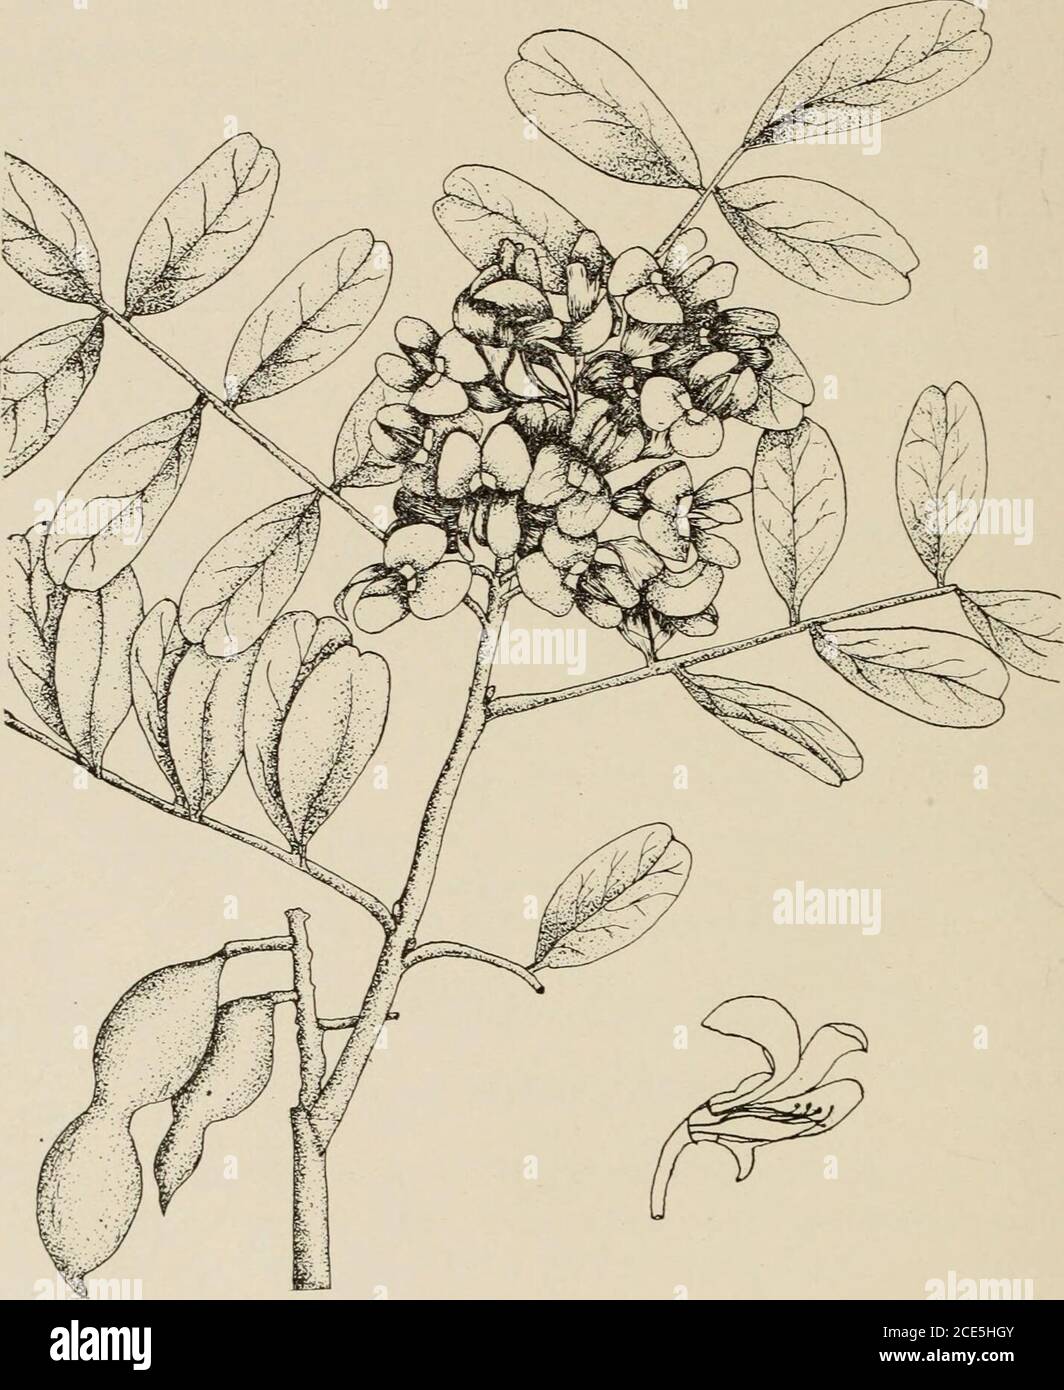 . Trees of Texas; an illustrated manual of the native and introduced trees of the state . with an odd leaflet at the end 1. Eysenhardtla. Leaves without an odd leaflet at the end. Pods constricted between the seeds 2. Sophora. Pods not constricted between the seeds. Branches with thorns, pods winged on the margin 3. Robinia. Branches without thorns, pods not winged 4. Coursetia. EYSENHARDTIA H. B. K. 1. Eysenhardtla orthocarpa S. AVatson. A small tree orshrub with tliin, gray, scaly ])ark and reddish brown twigs.Leaves ecjually pinnate, leaflets 10-2-i i)airs. Flowers white indense many flower Stock Photo